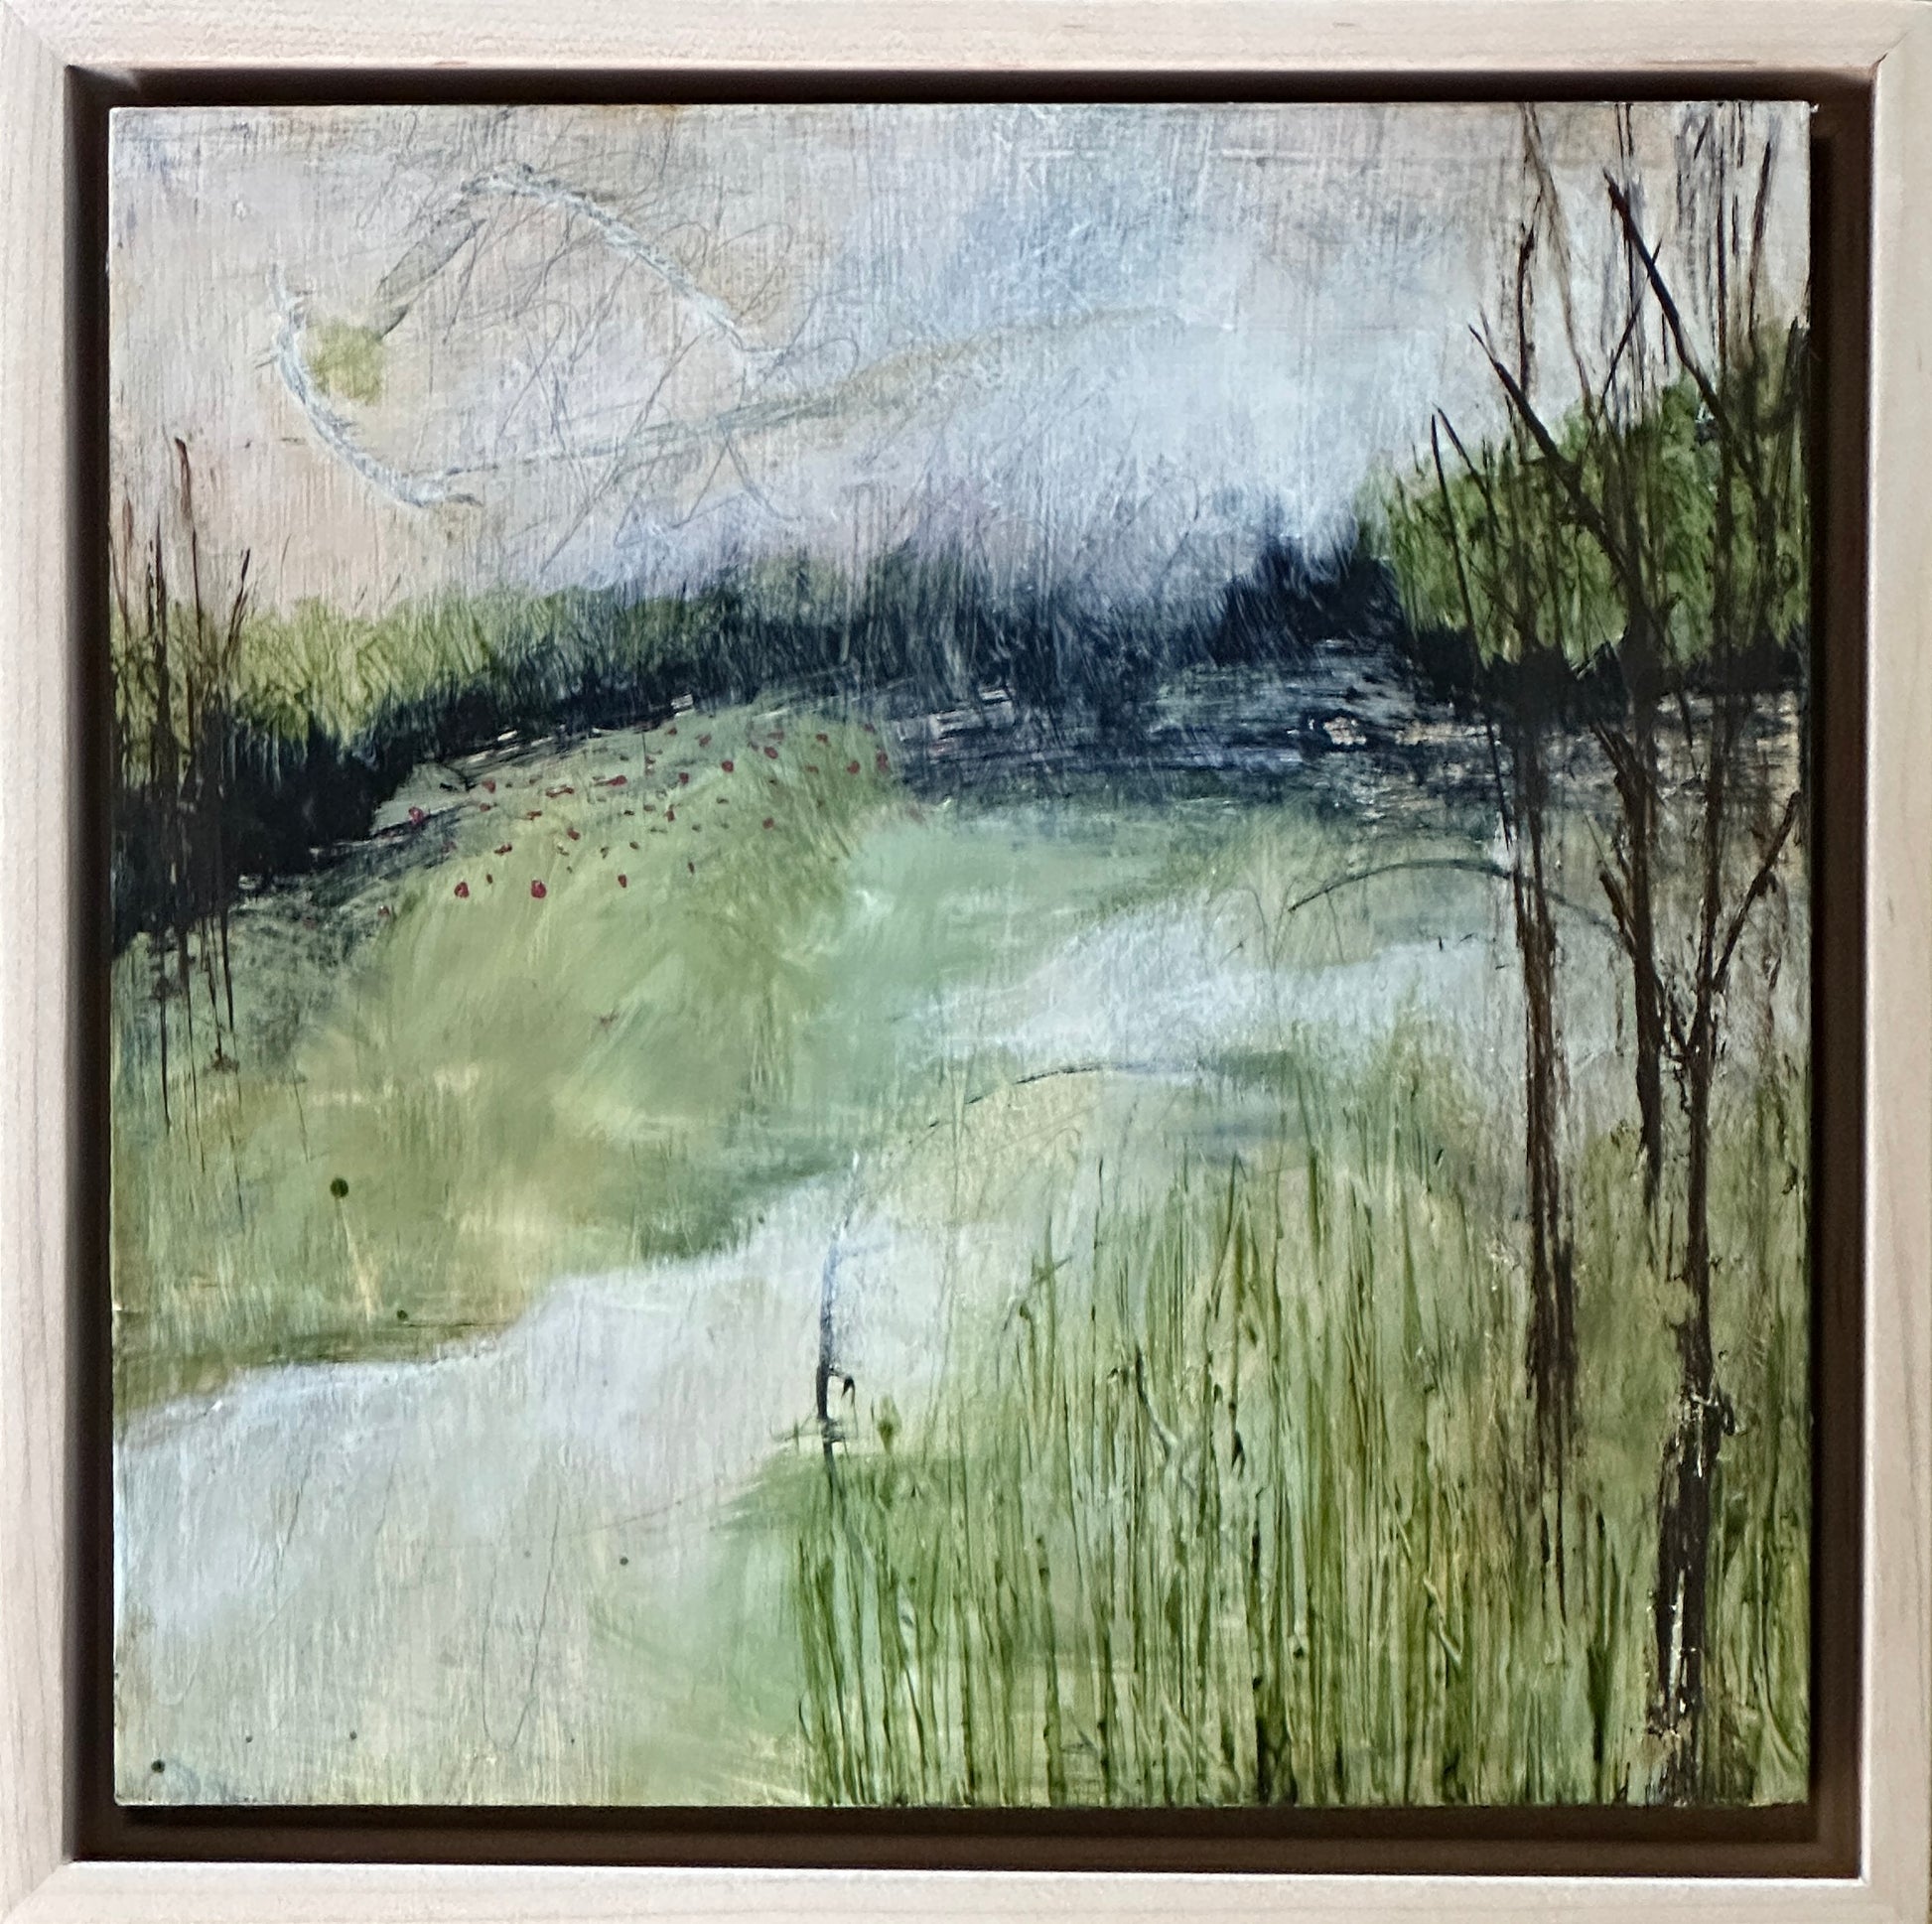 8 x 8-inch, framed, impressionist scene of a distant river with the impression of Spring juxtaposed with winter trees in the foreground.  Acrylic painting on cradled panel with natural wood frame.  By Cumming, GA artist, Juanita Bellavance. Part of our 25 Days of Minis 2022 collection.  Collect them all!